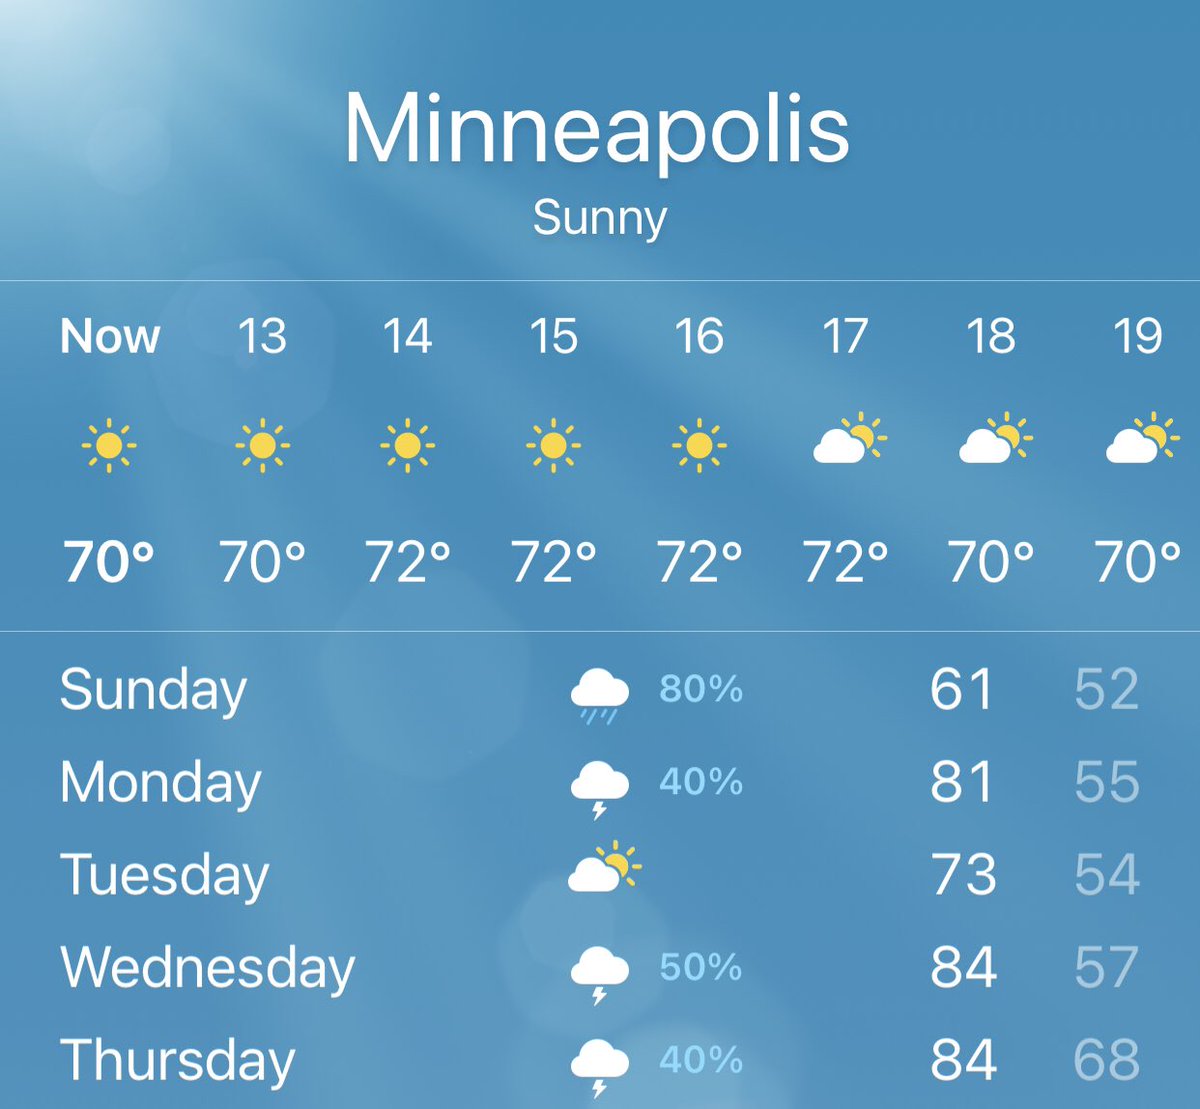 Minnesota weather: 

Ope, here’s summer for ya!

People with POTS, migraines, dysautonomia, hyperthyroidism, going through menopause:

That’s different https://t.co/psRctU74p5